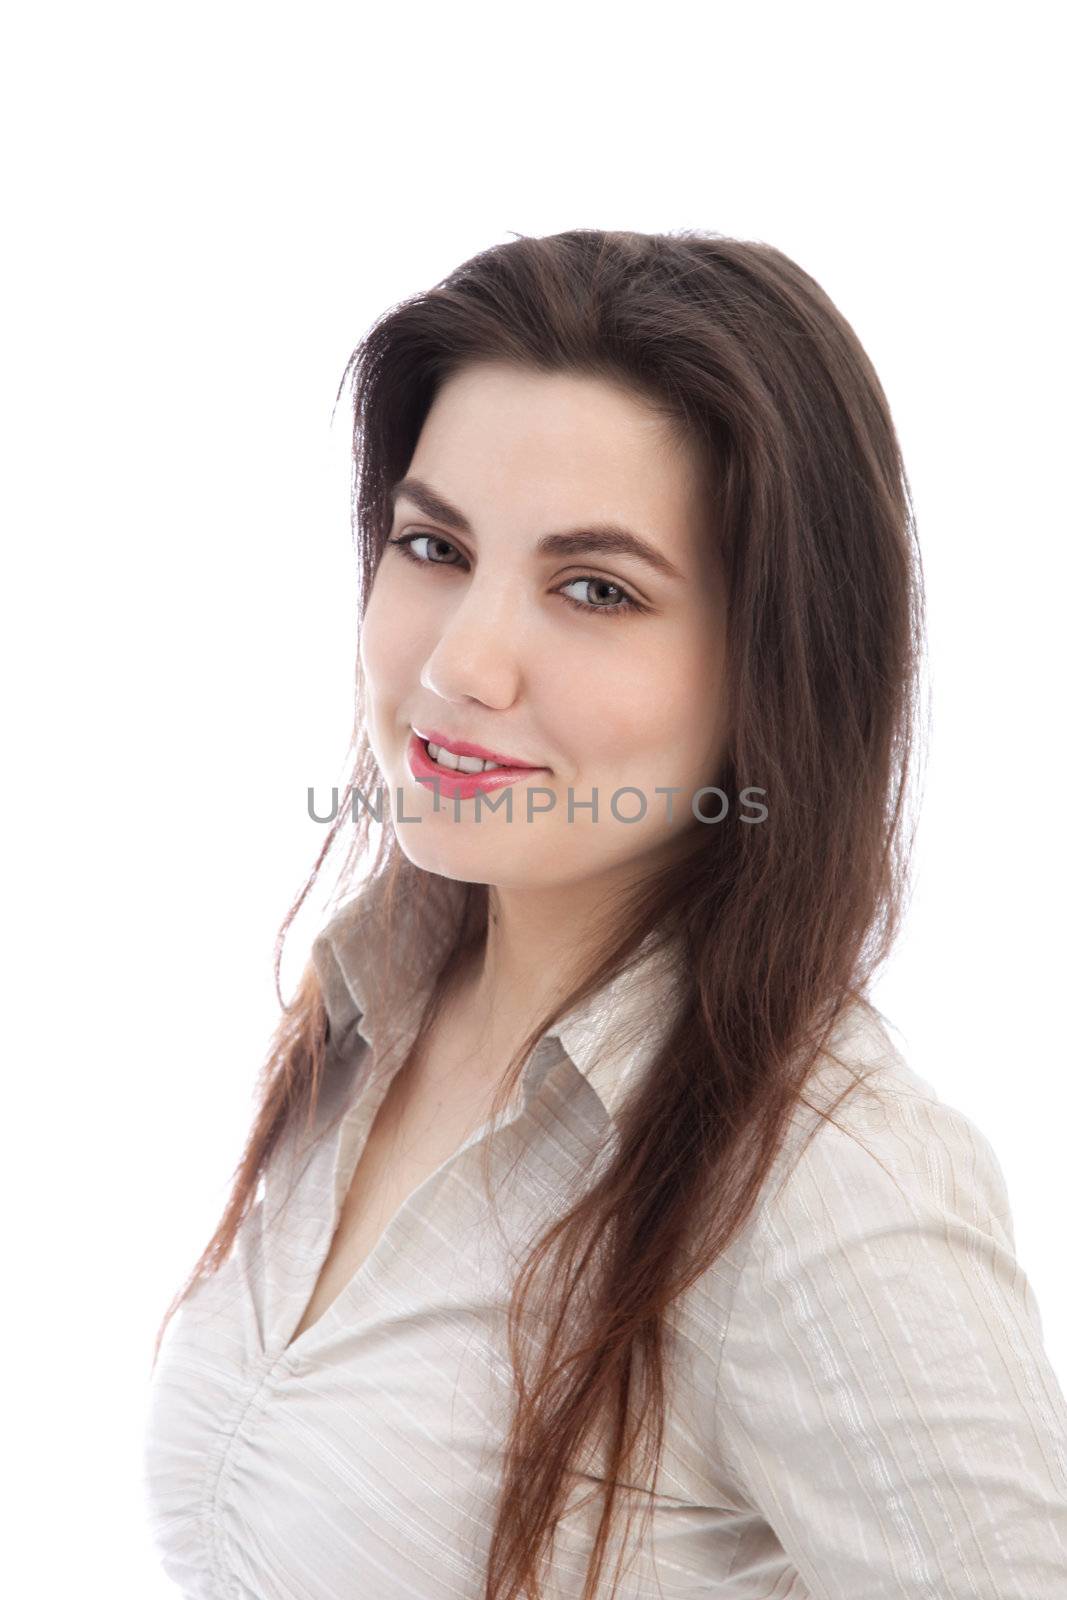 Closeup portrait of the head and shoulders of an attractive young brunette woman smiling at the camera isolated on white